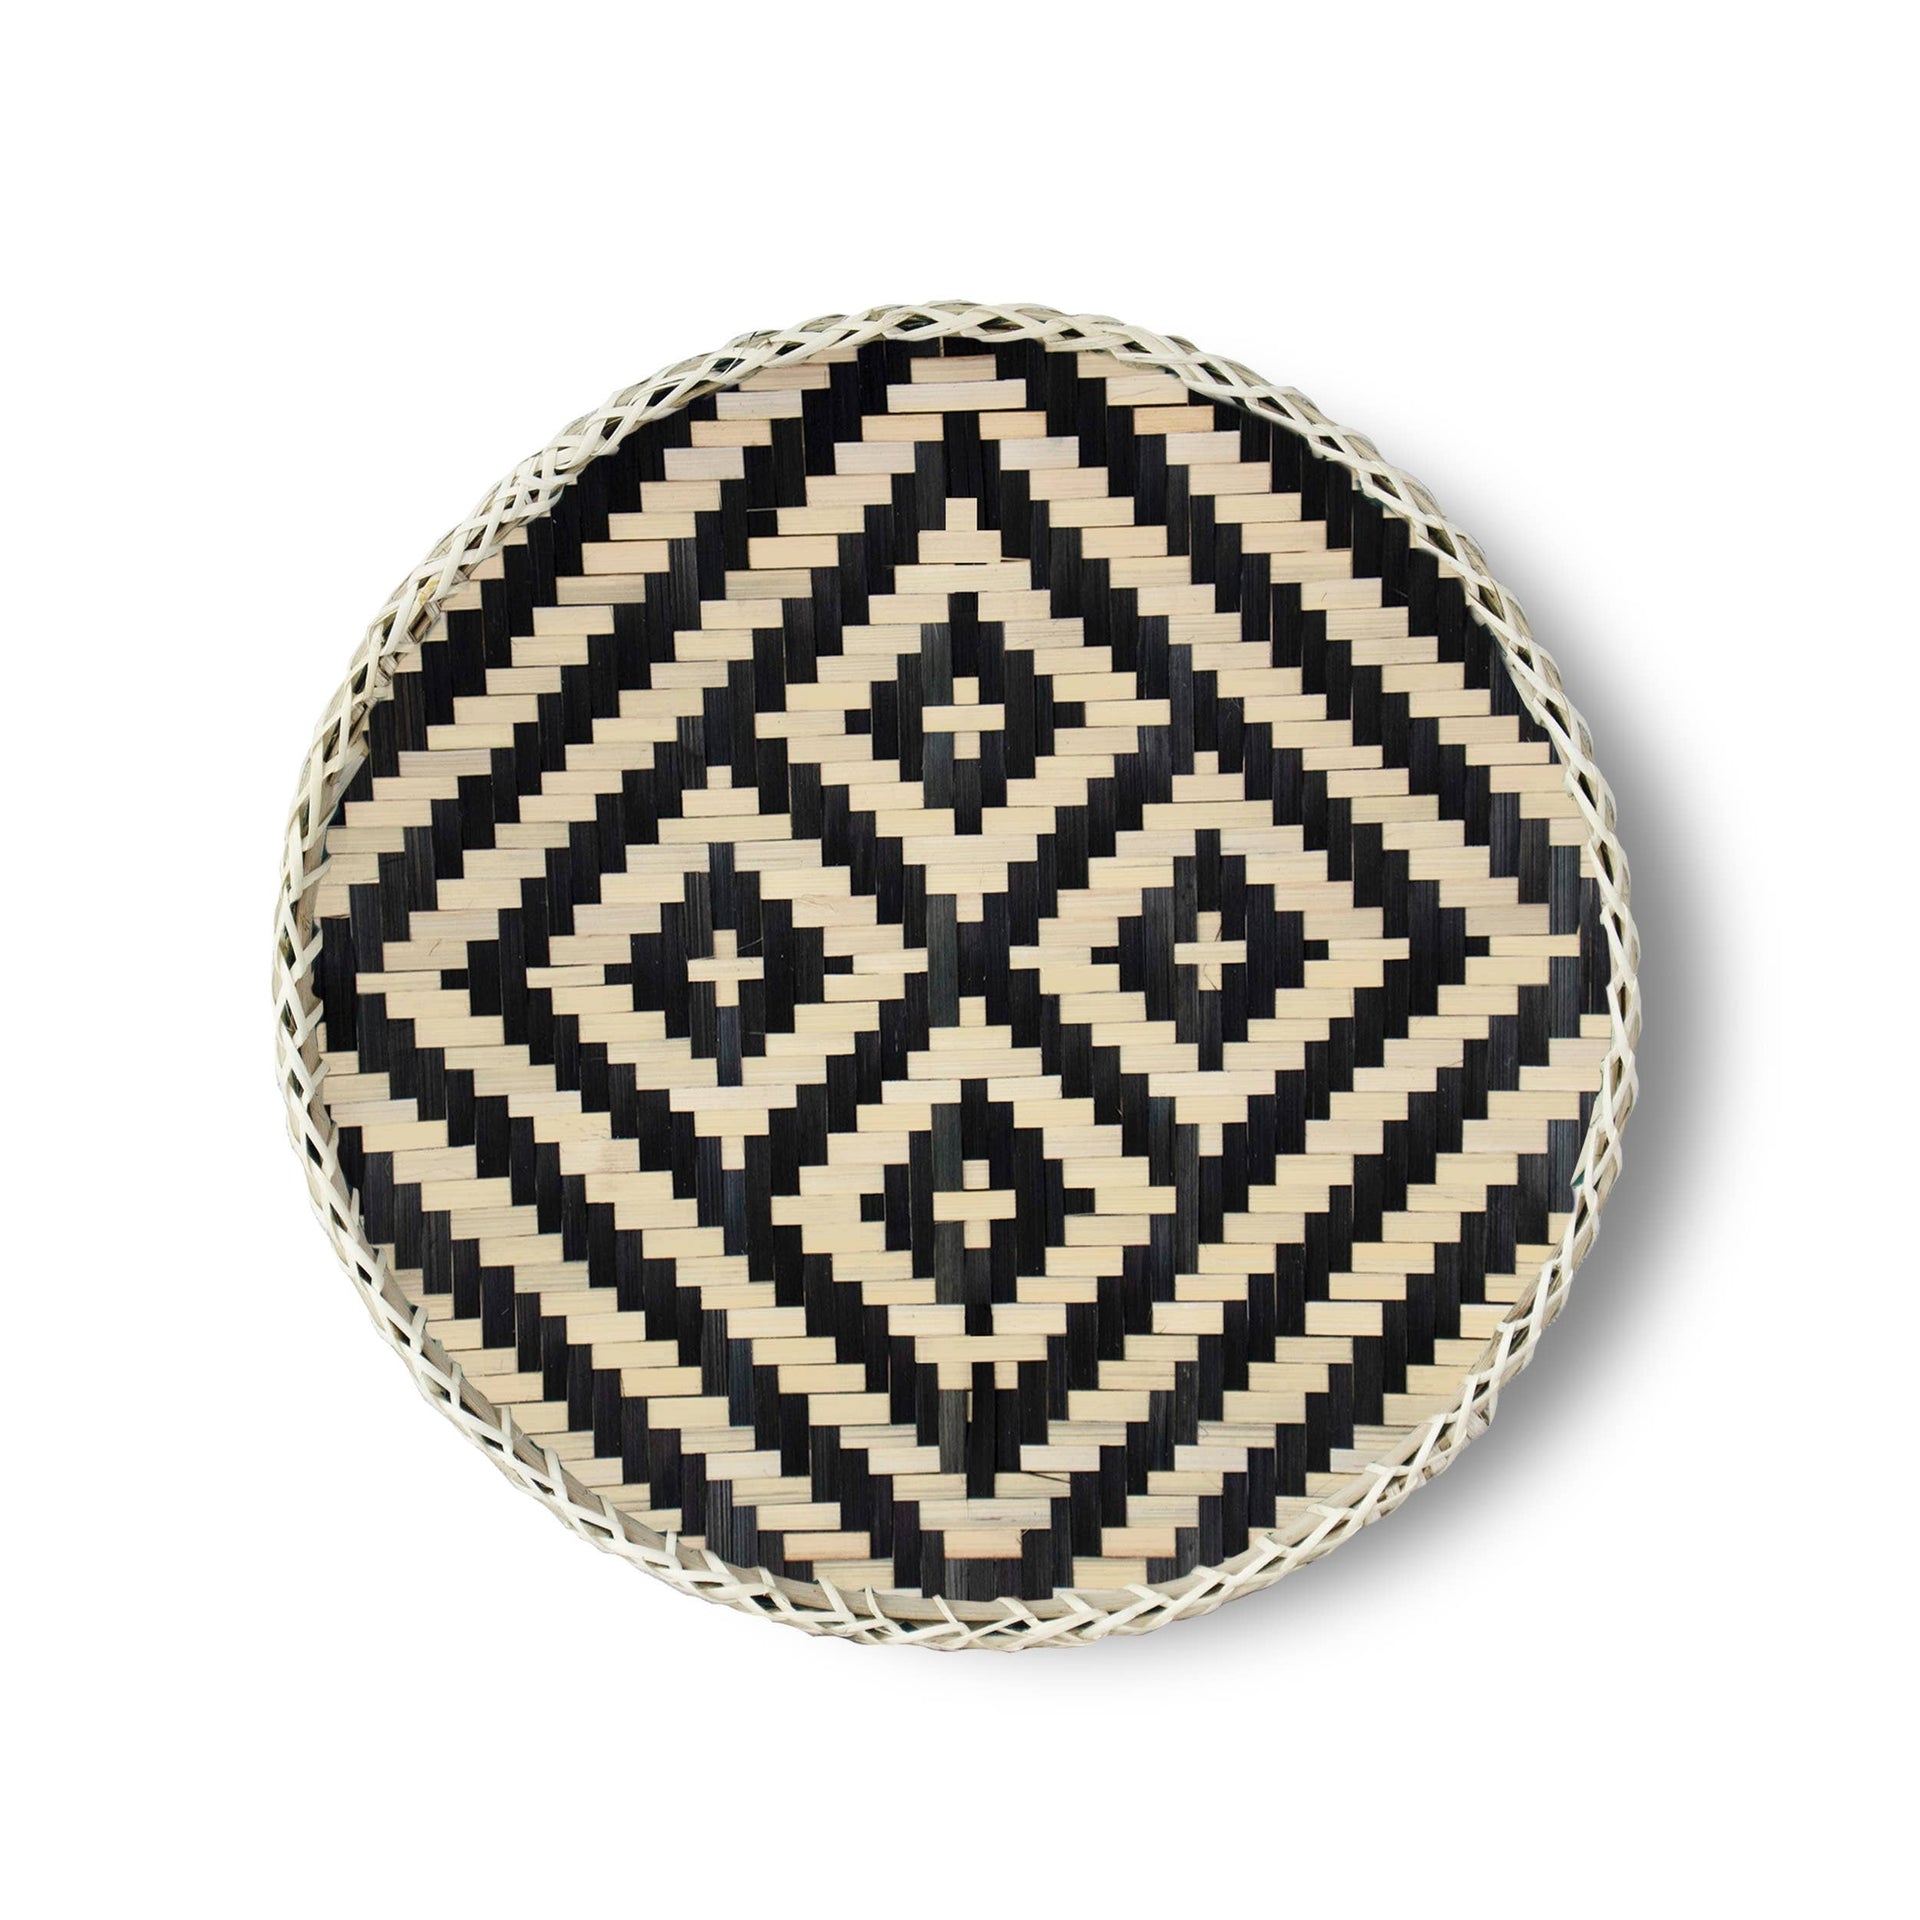 Bamboo Woven Round Basket Tray  MadeTerra   